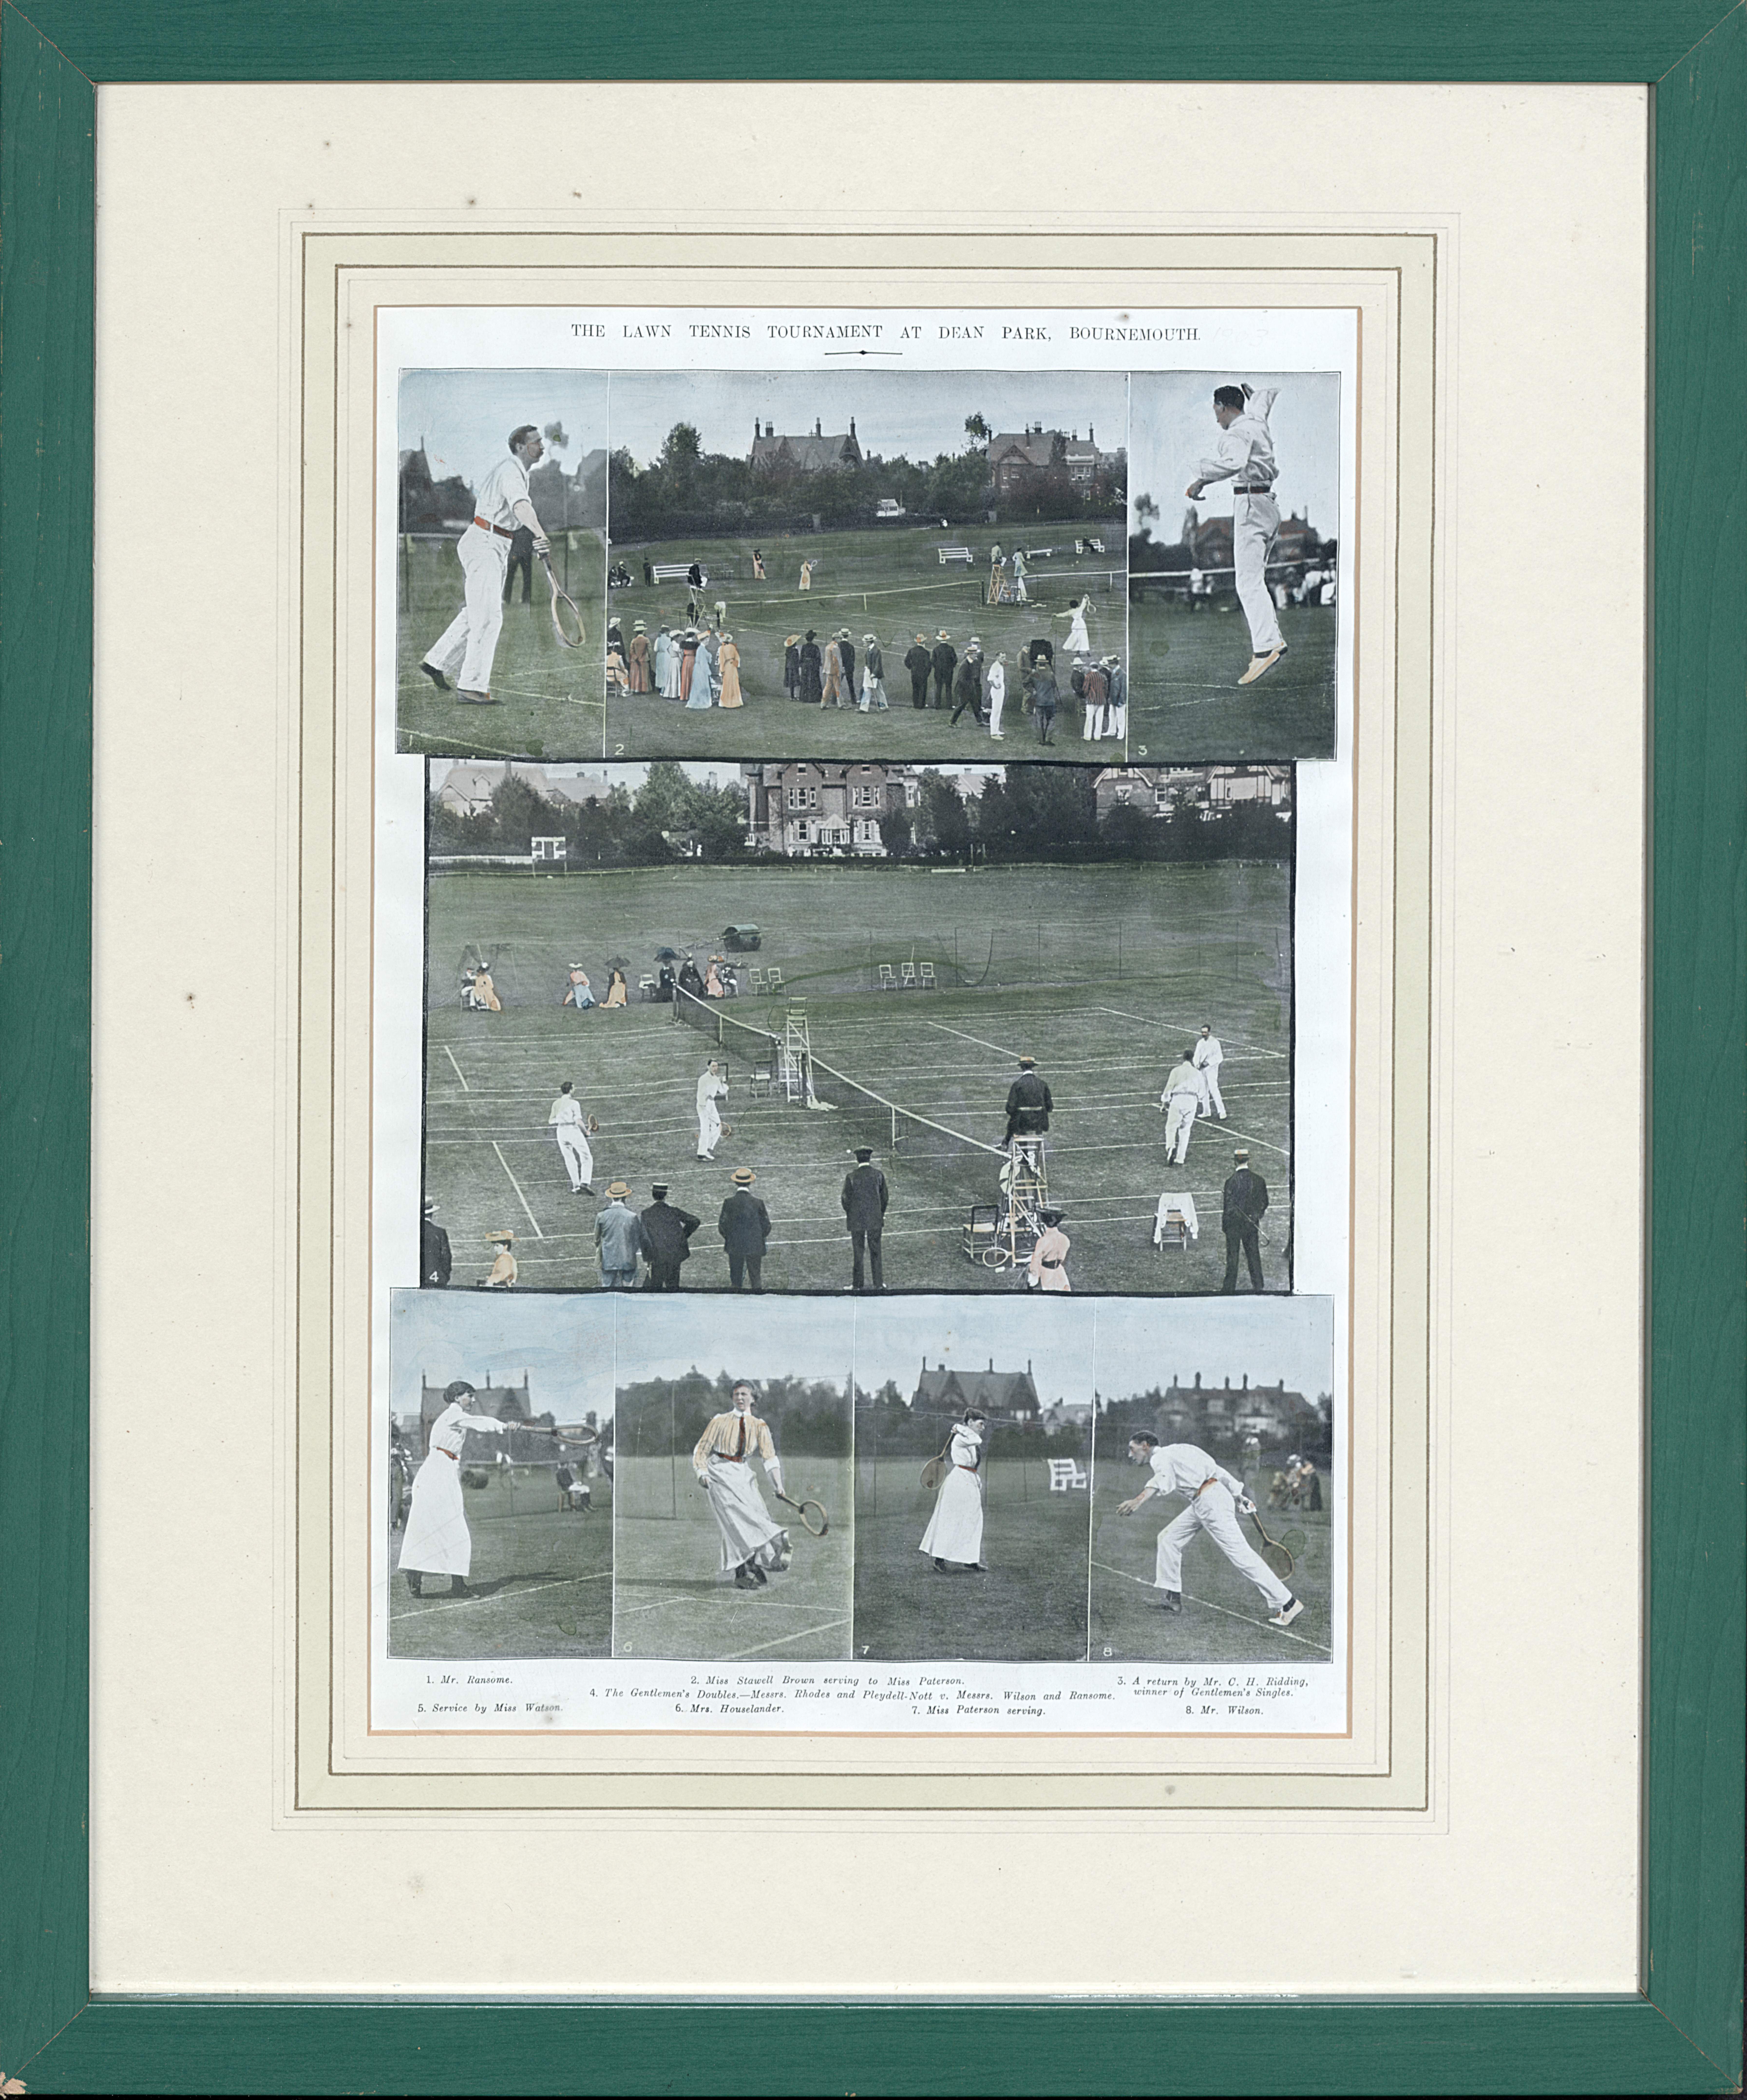 The Lawn Tennis Tournament at Dean Park, framed collage of photos, 1900s